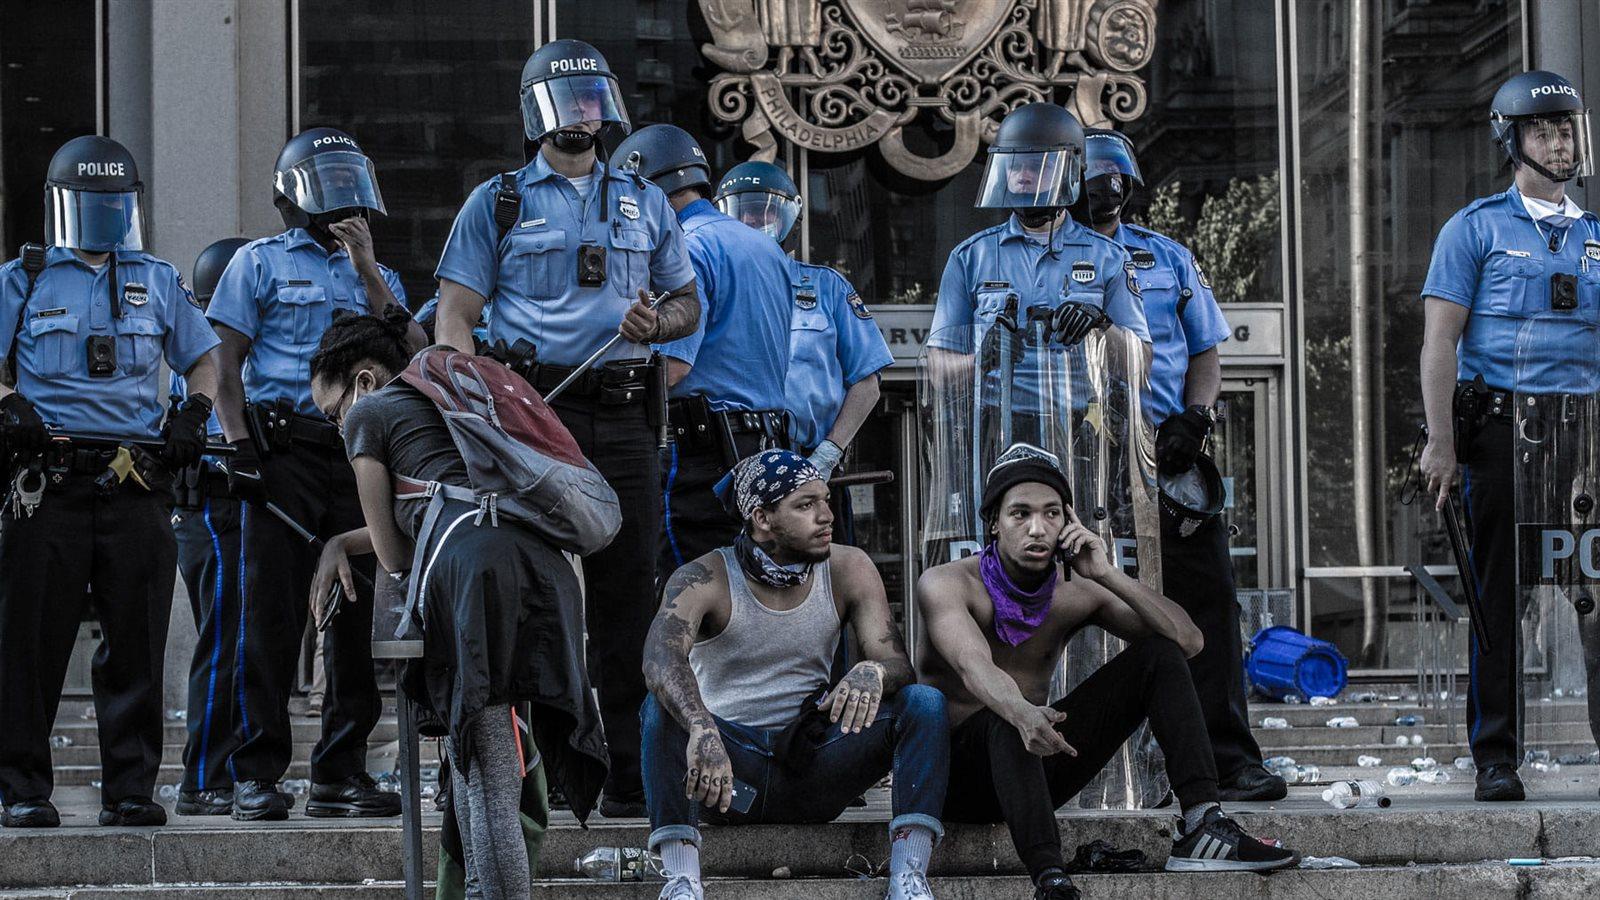 Two men sit in front of a crowd of police officers.